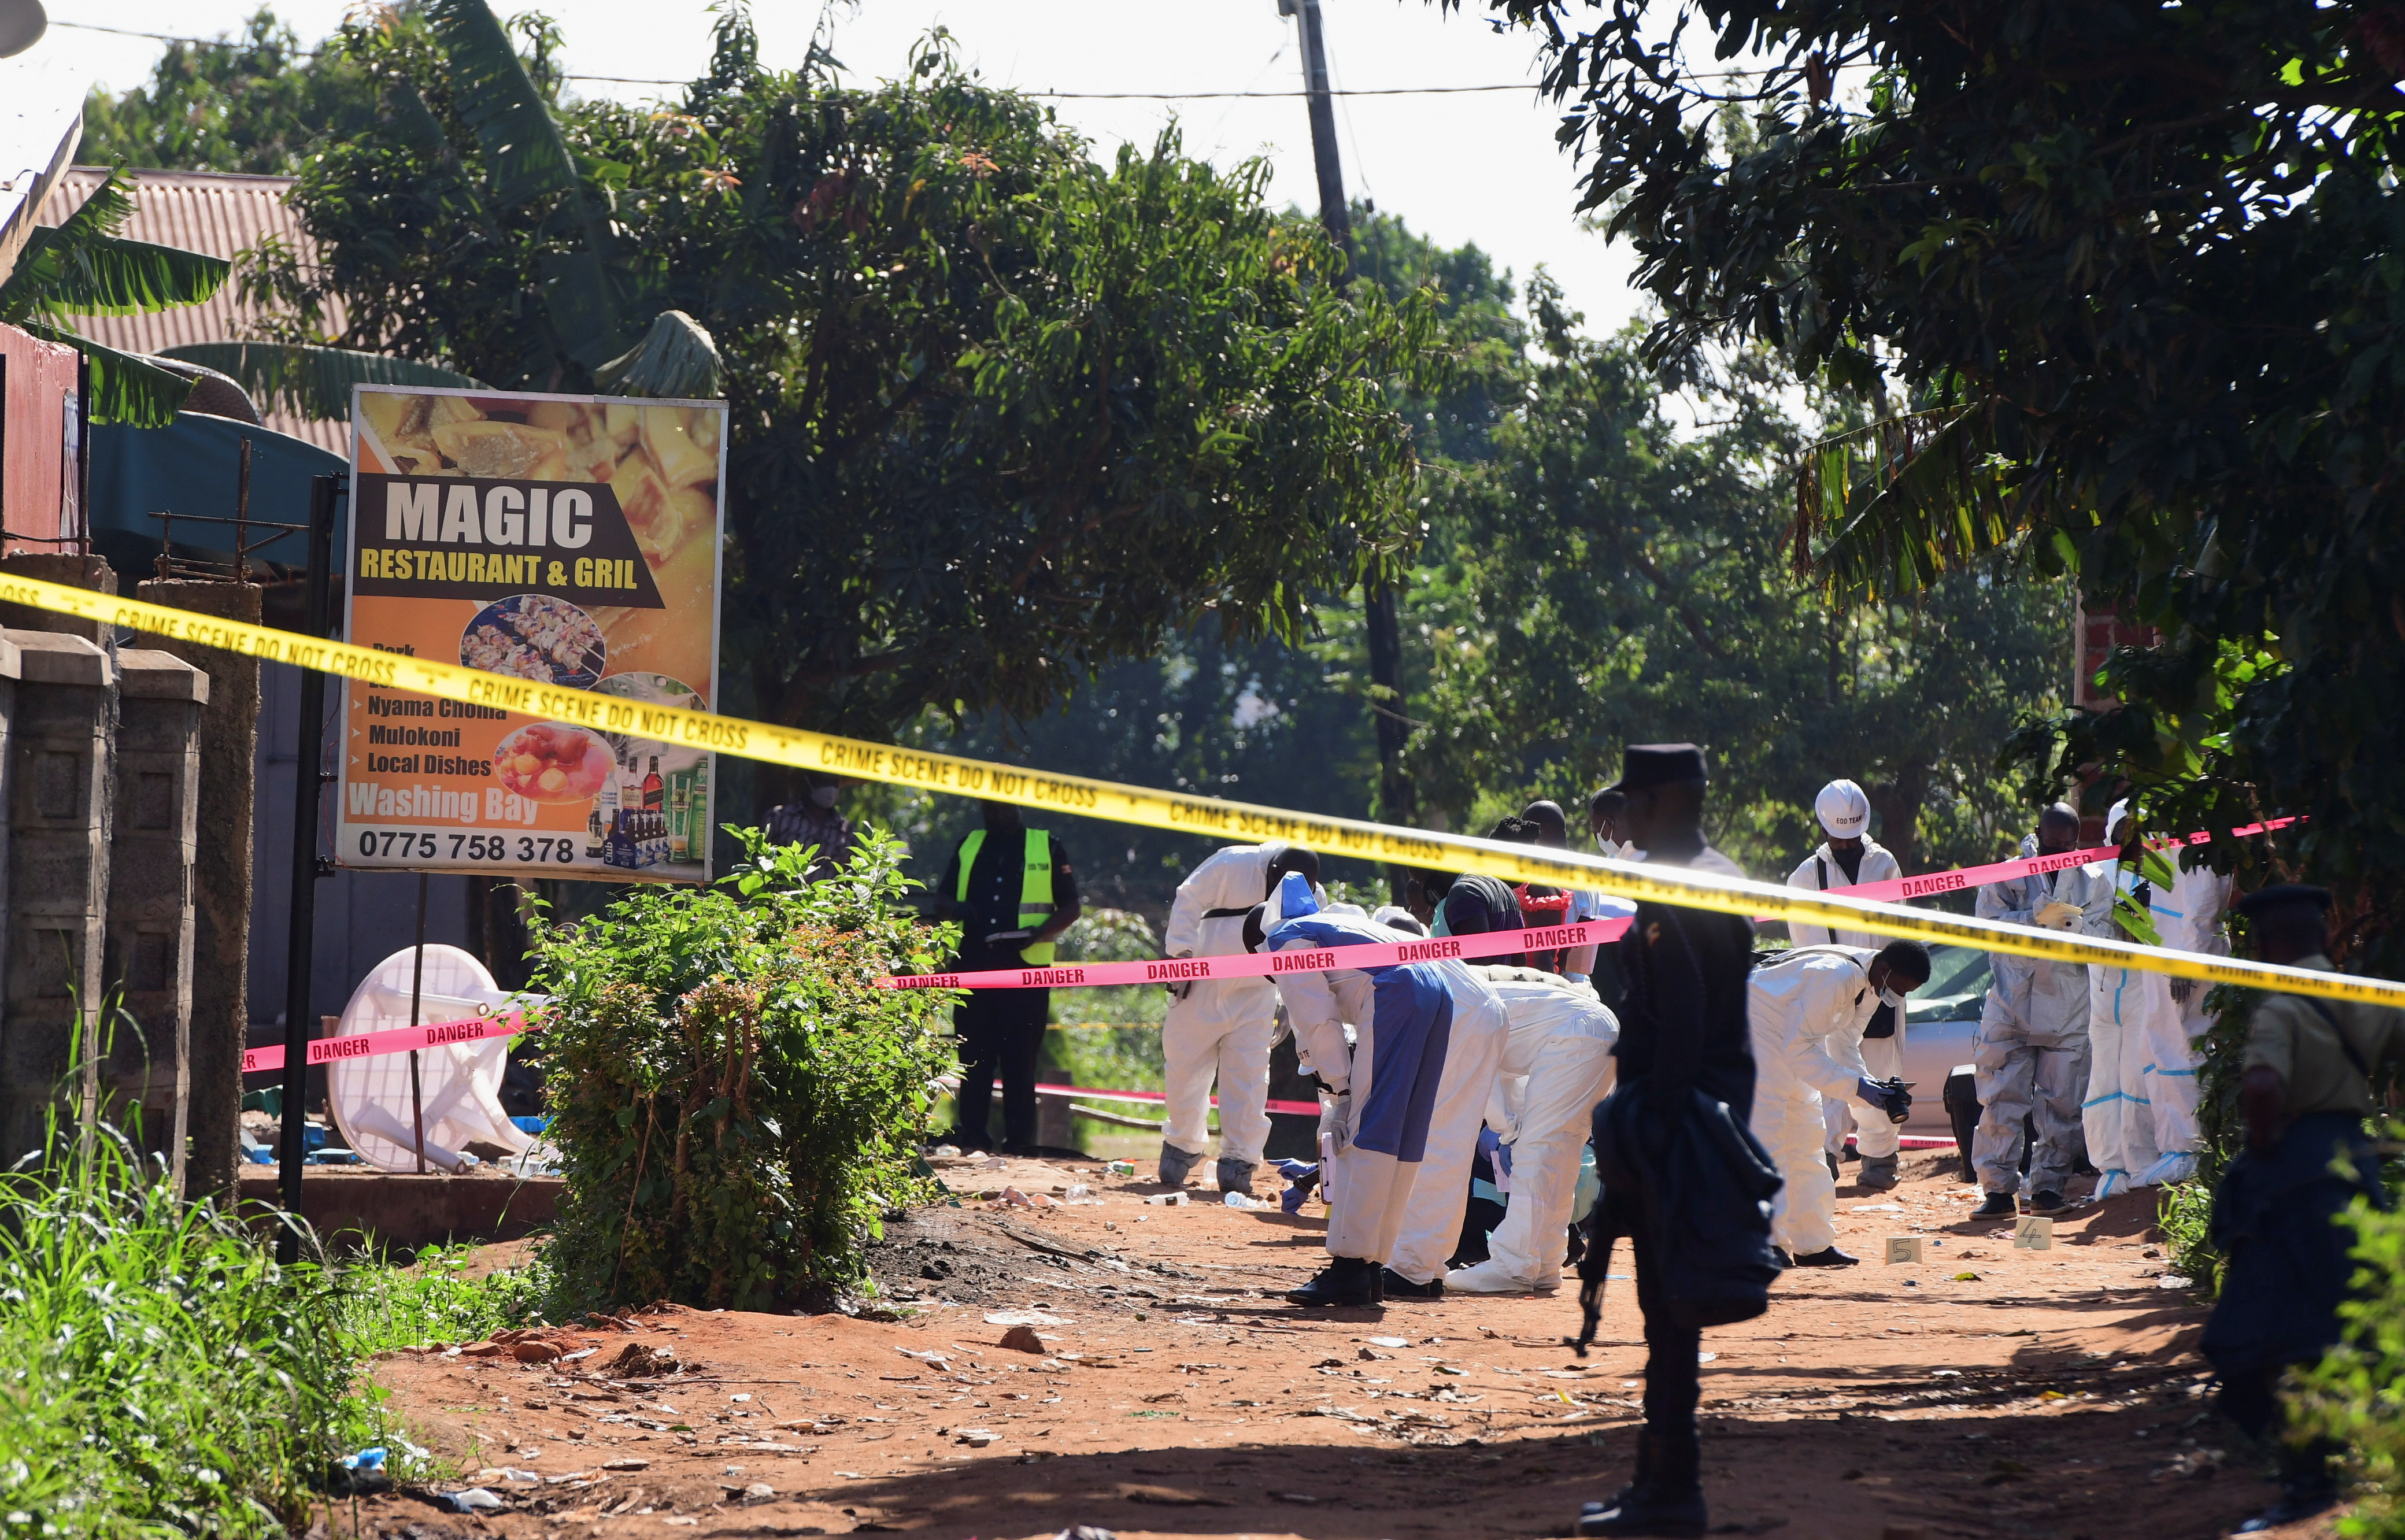 Ugandan police members and explosives experts secure the scene of an explosion in Komamboga, a suburb on the northern outskirts of Kampala, Uganda October 24, 2021. REUTERS/Abubaker Lubowa